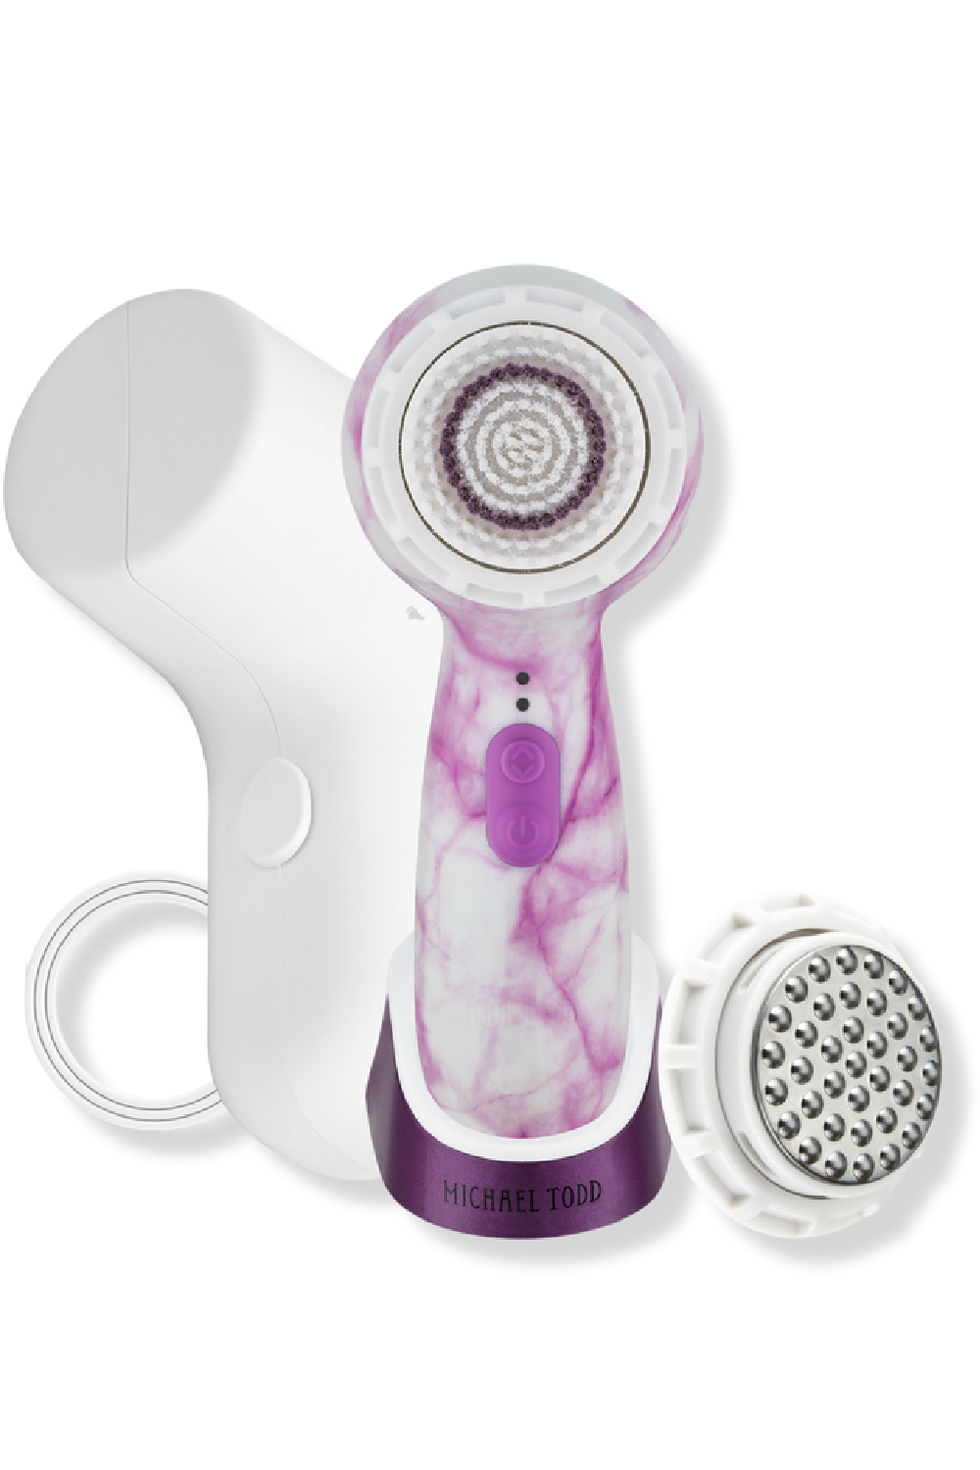 Soniclear Petite Antimicrobial Skin Cleansing Brush